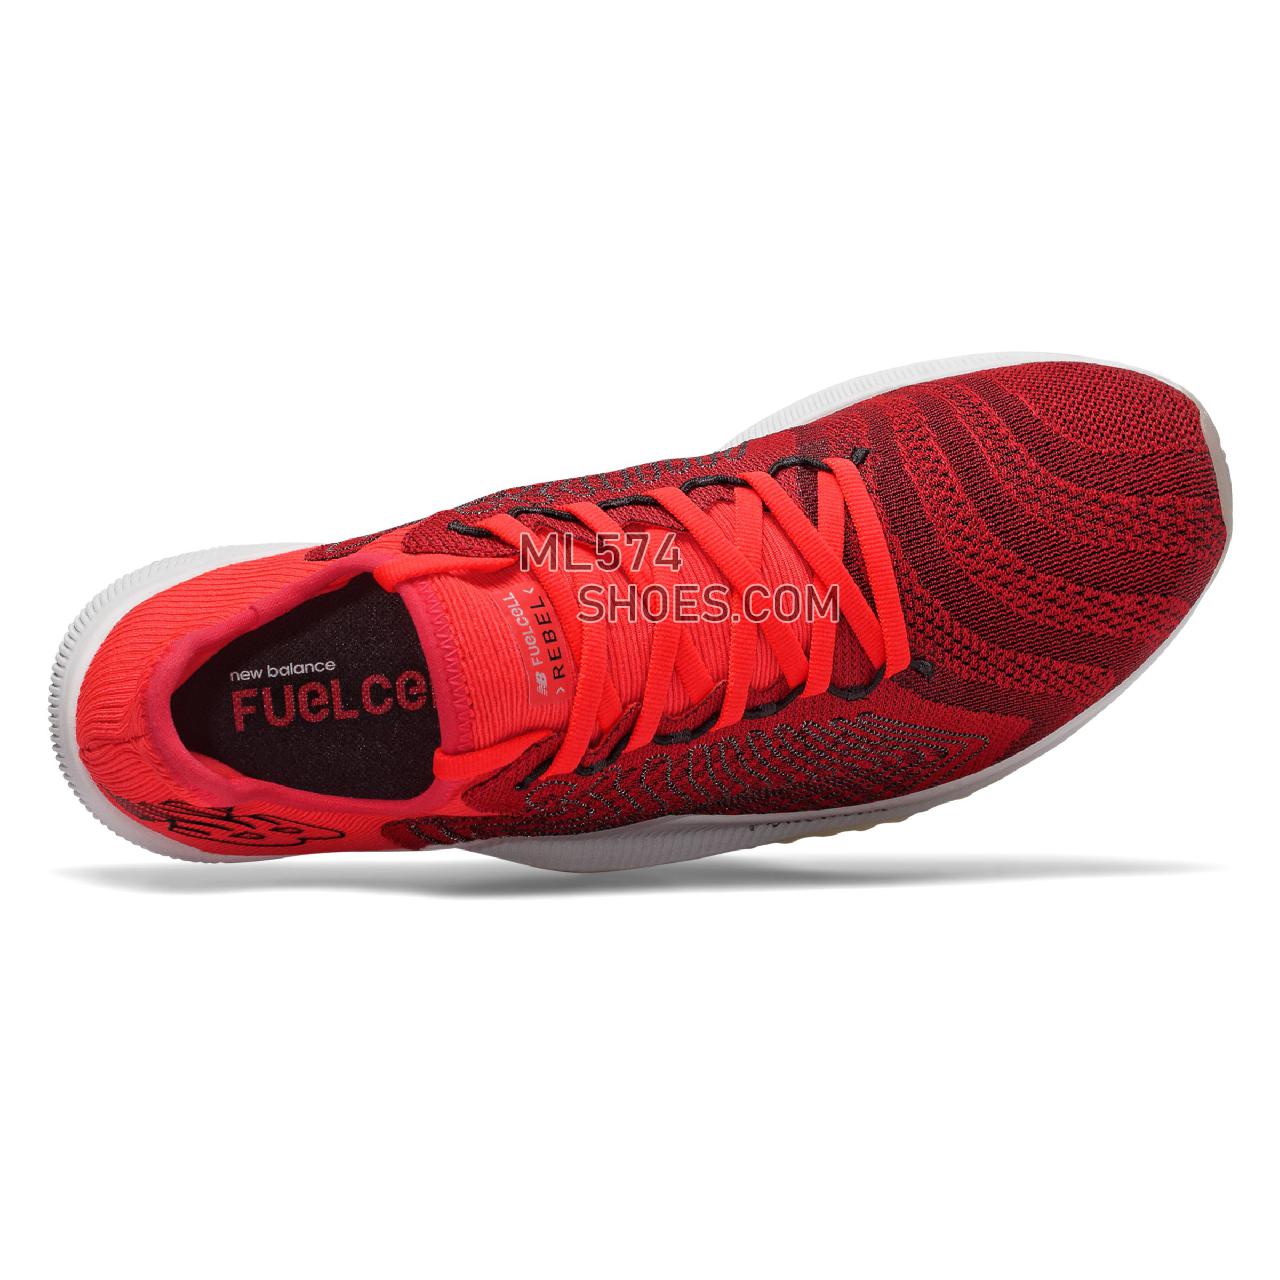 New Balance FuelCell Rebel - Men's Neutral Running - Energy Red with Black - MFCXRW